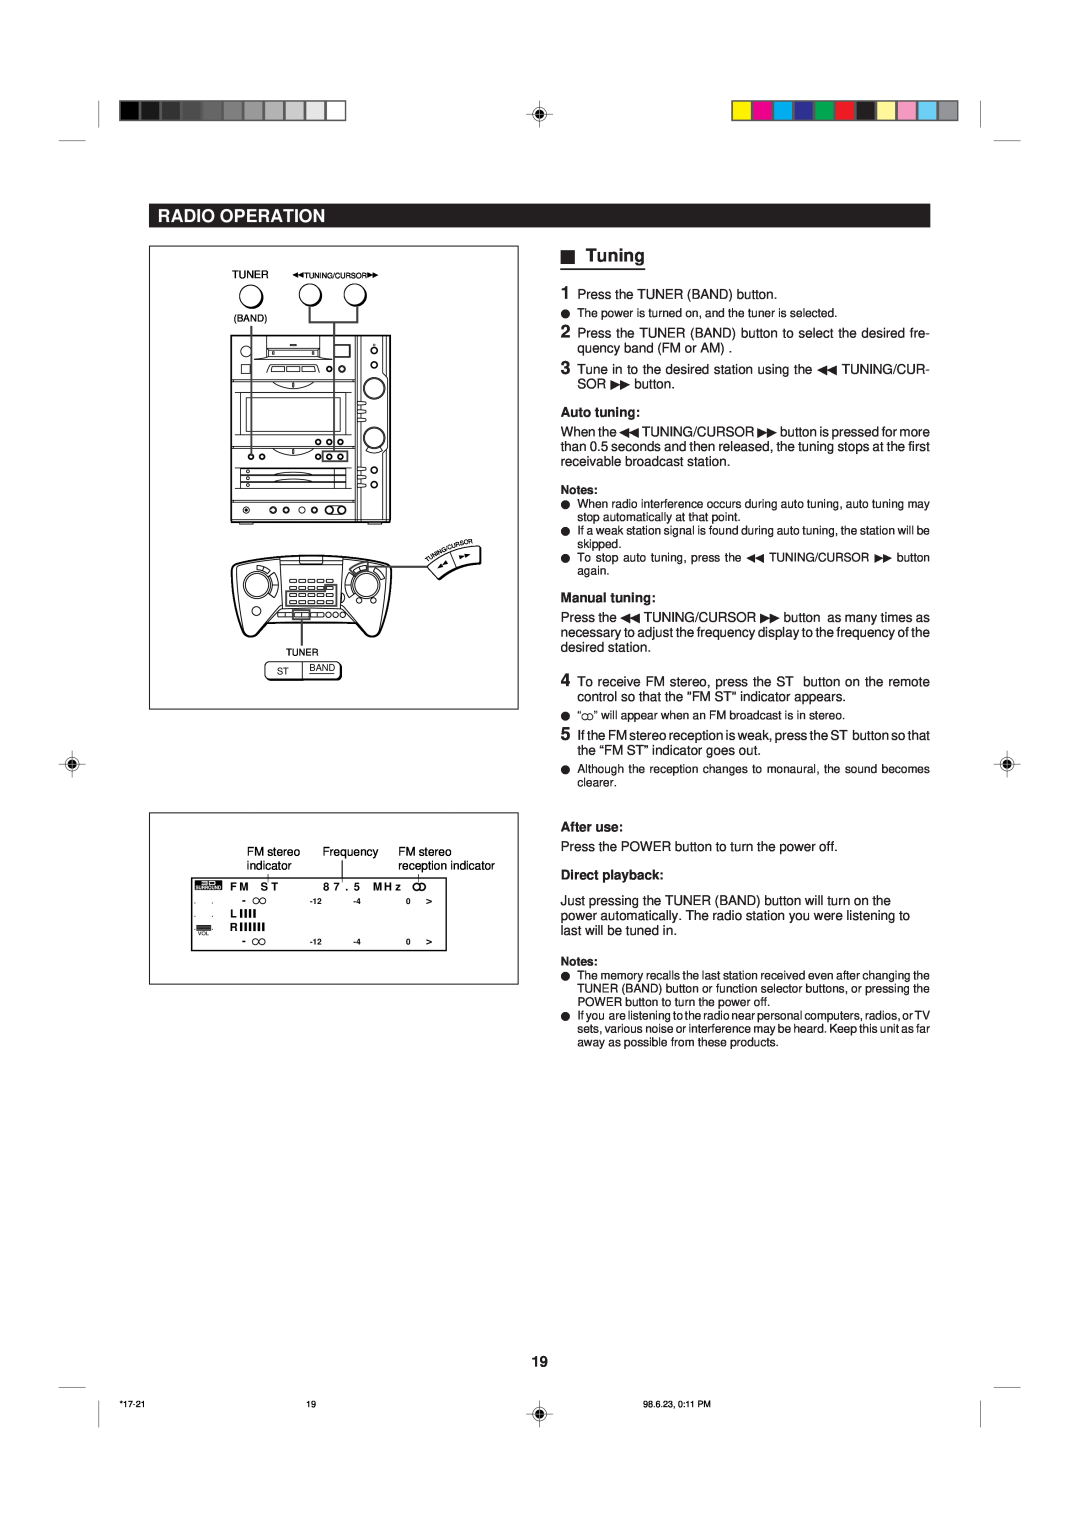 Sharp MD-X8 operation manual Radio Operation, HTuning, Auto tuning, Manual tuning, After use, Direct playback 